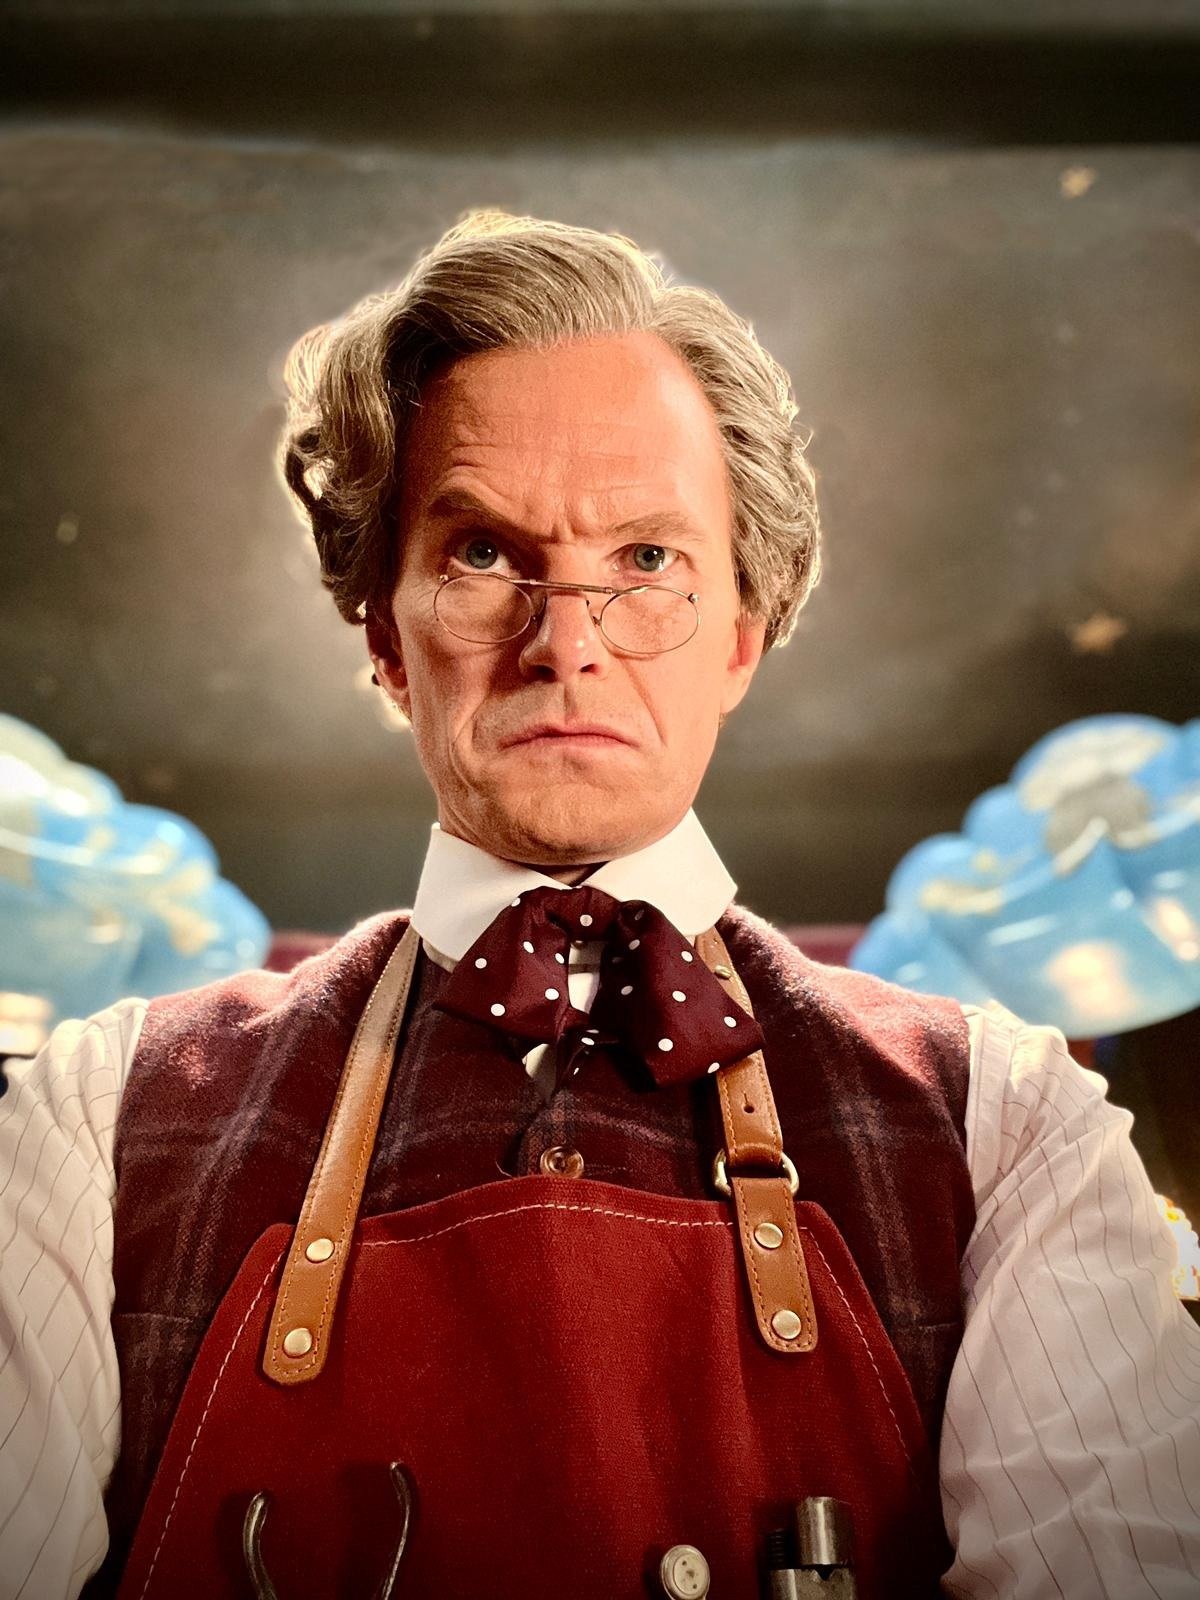 New Doctor Who 60th Anniversary Trailer Teases Neil Patrick Harris… as the Celestial Toymaker?!